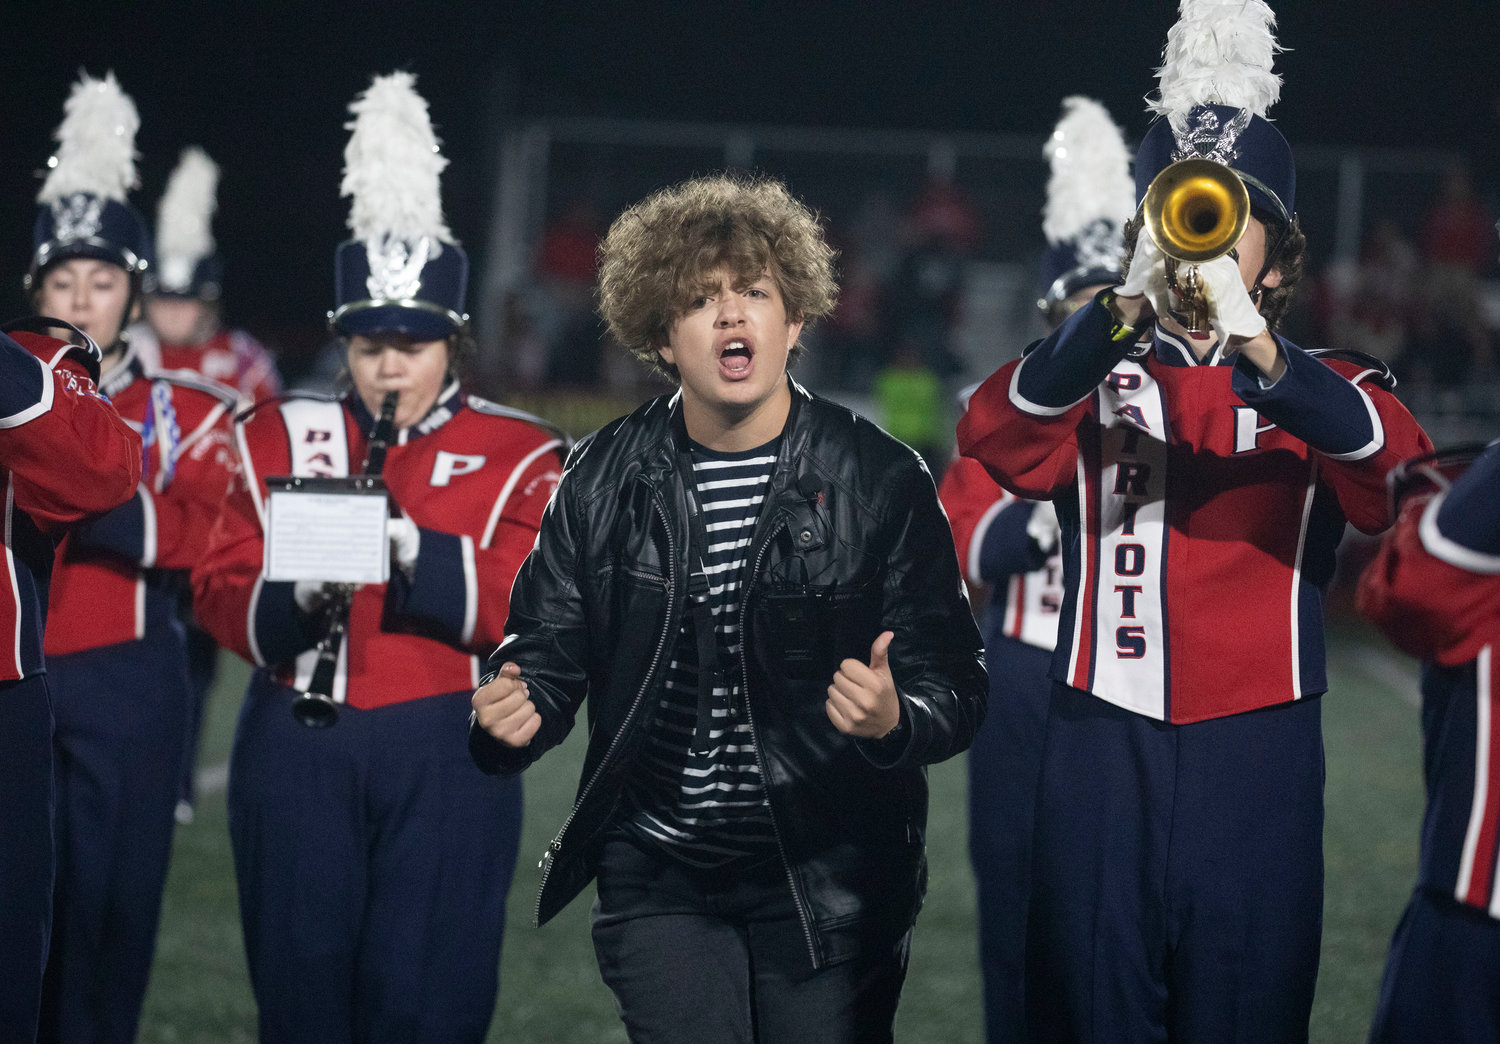 Elvis was in the house during the Portsmouth football game halftime show. Dillon Fesmeier played the singer/actor as the band played his hits.